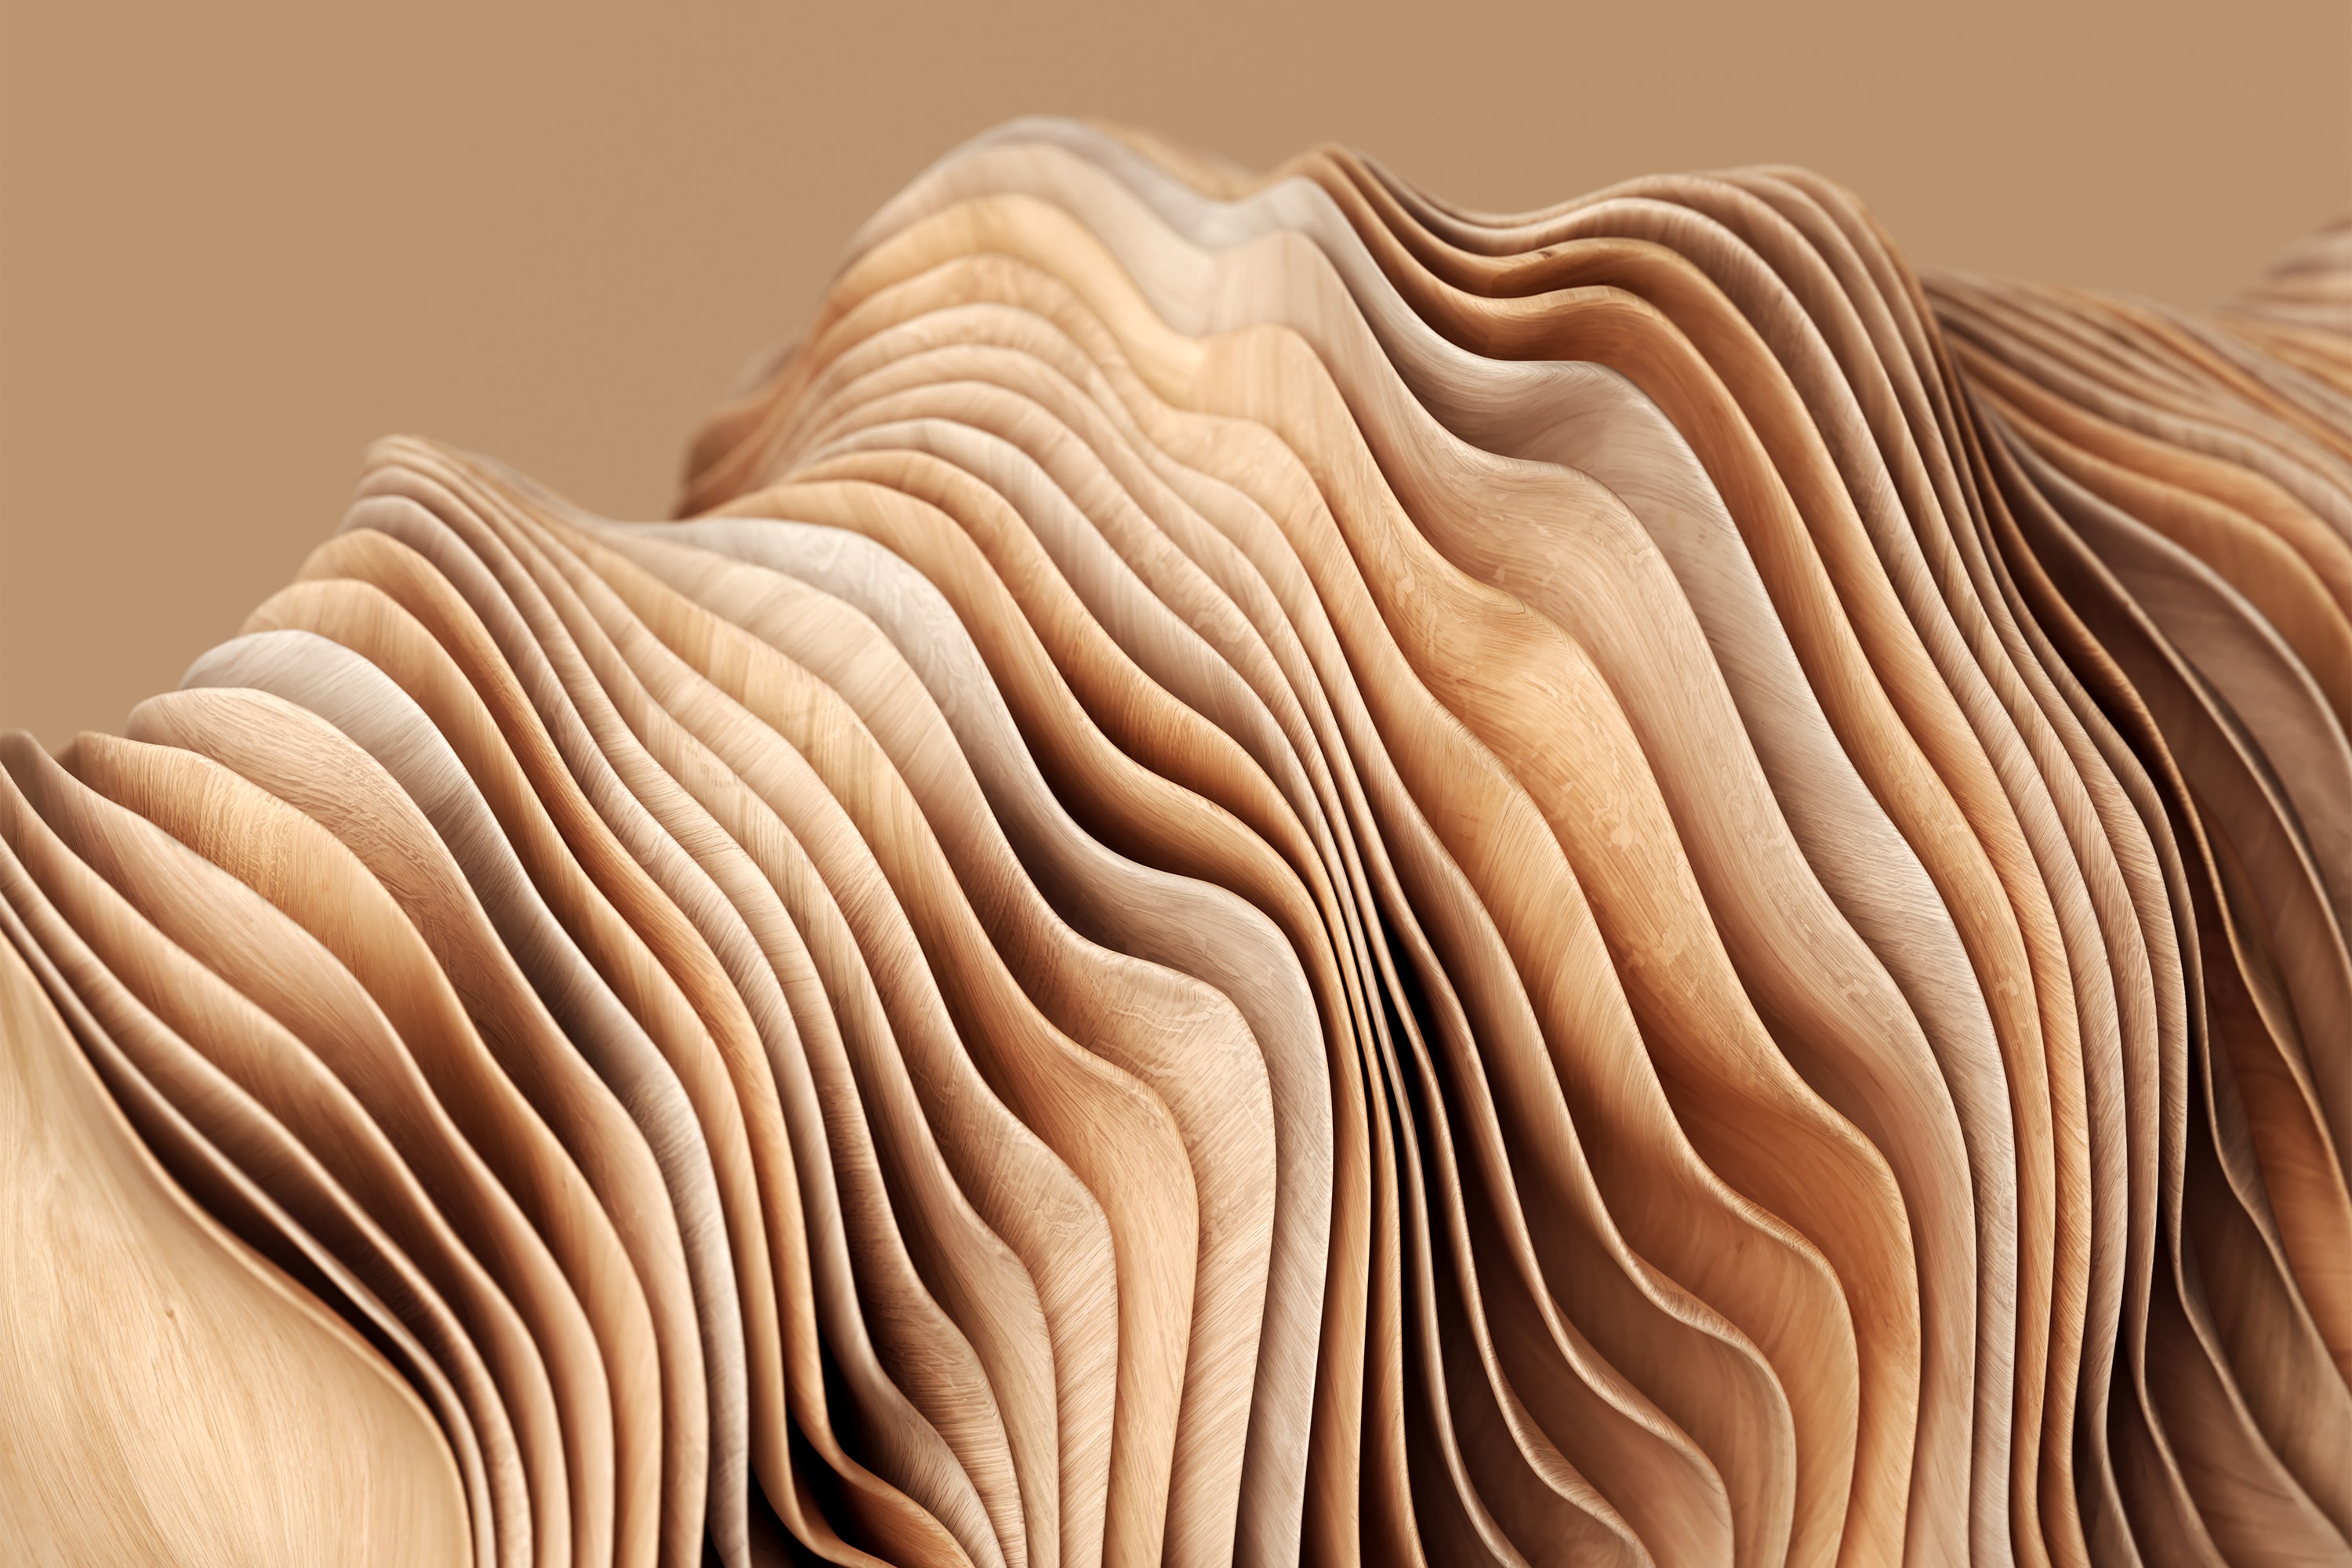 Digital generated image of wooden twisted shapes